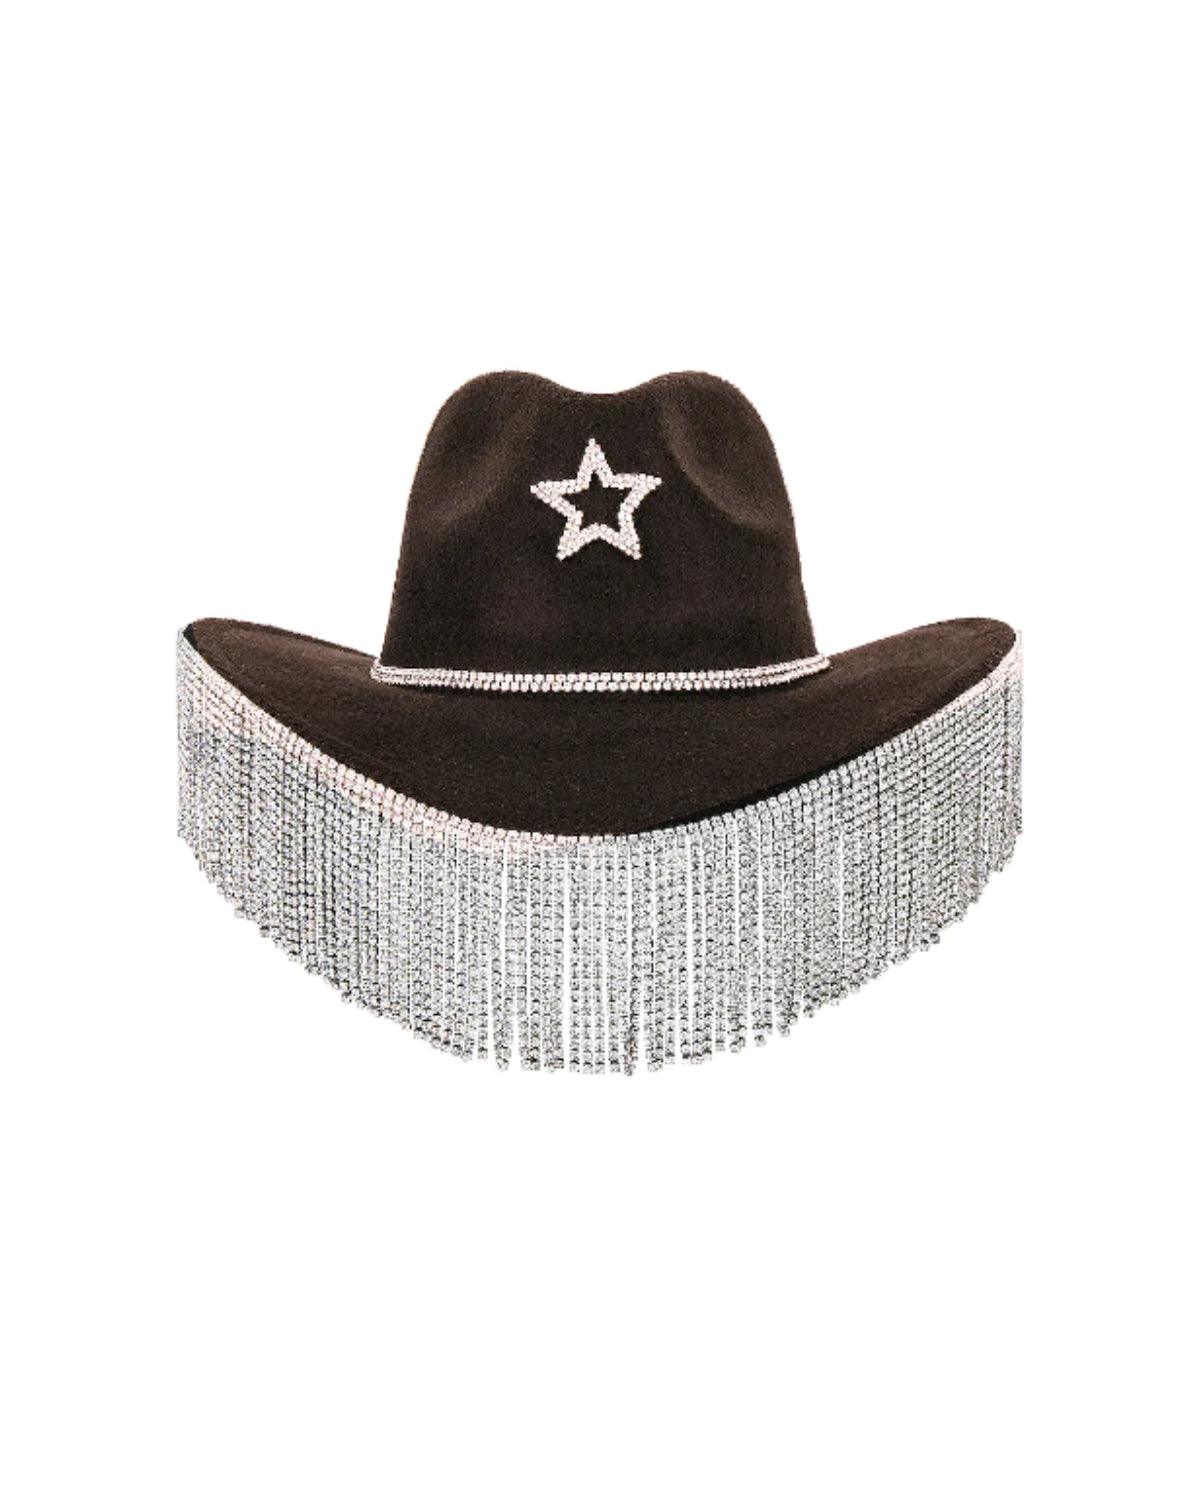 STAR COWBOY HAT - 8 Other Reasons